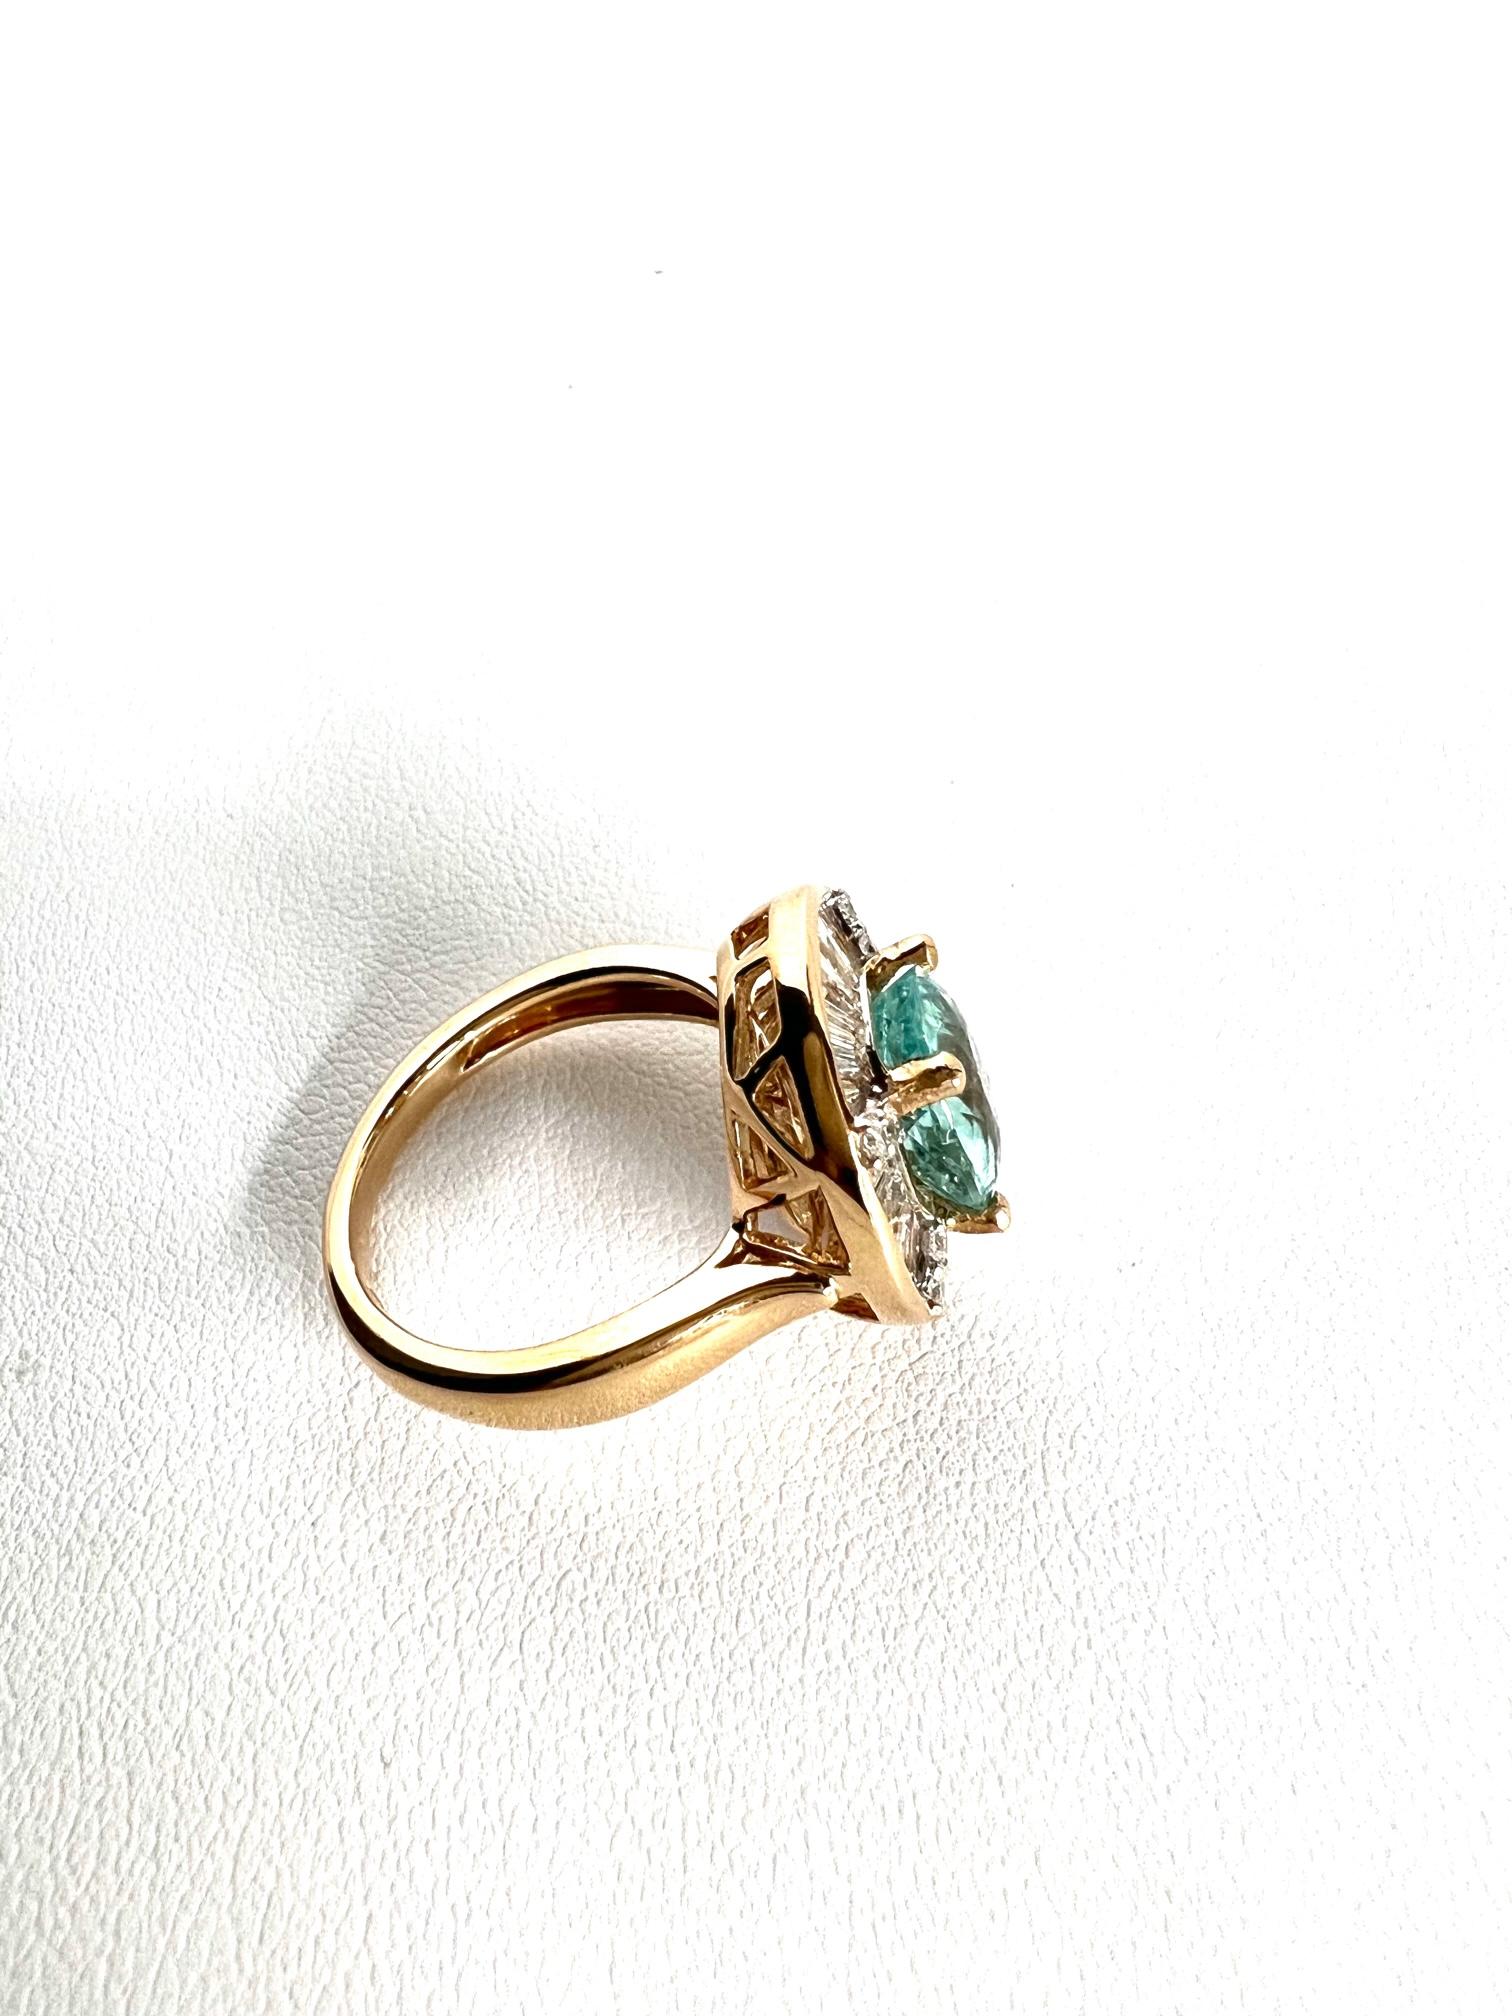 Women's Ring in 18k Red Gold with Paraiba Tourmaline and Diamonds For Sale